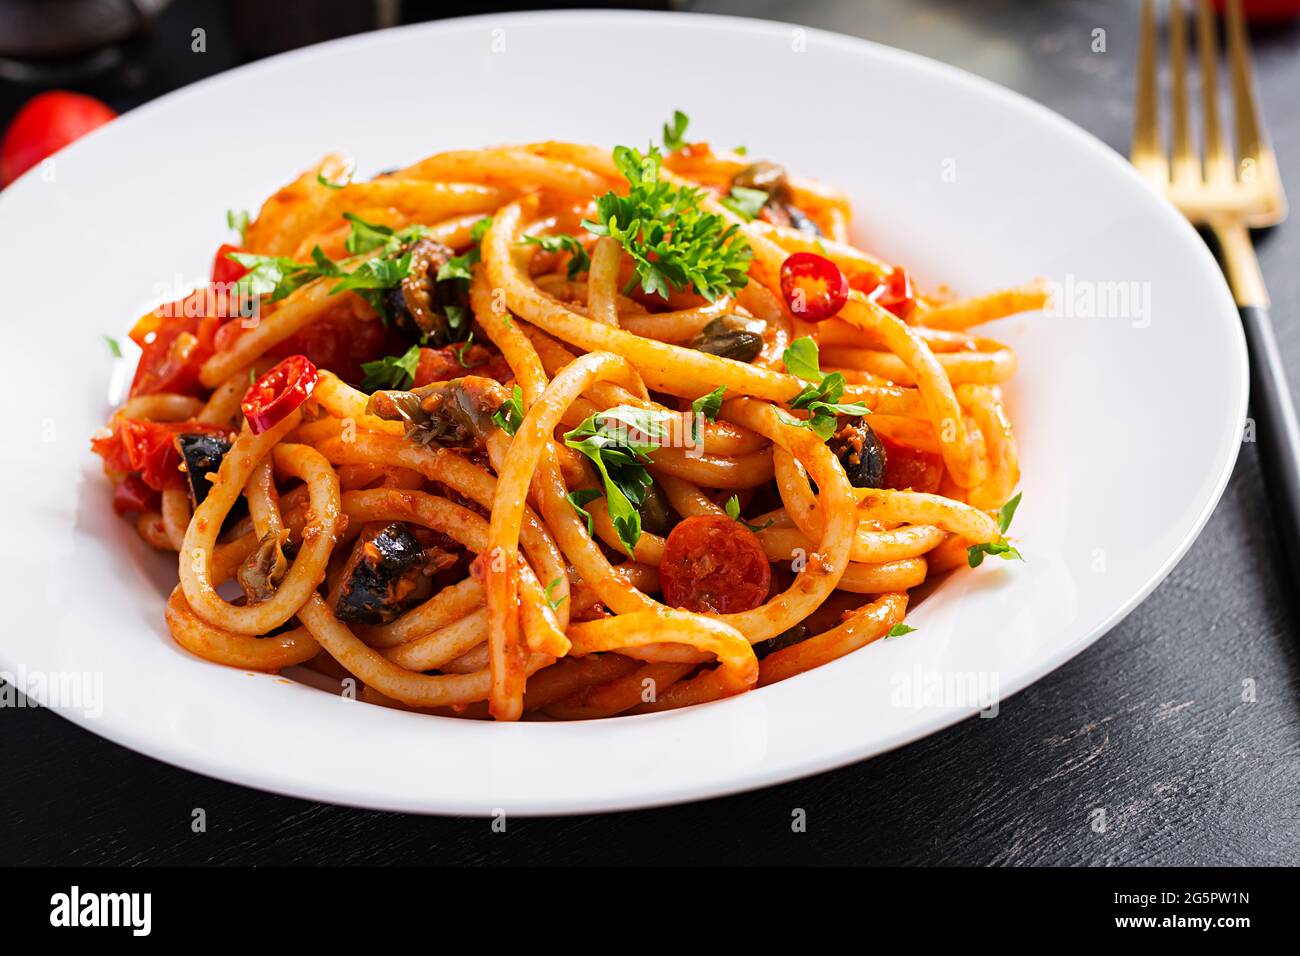 Spaghetti alla puttanesca - italian pasta dish with tomatoes, black olives, capers, anchovies and parsley. Stock Photo